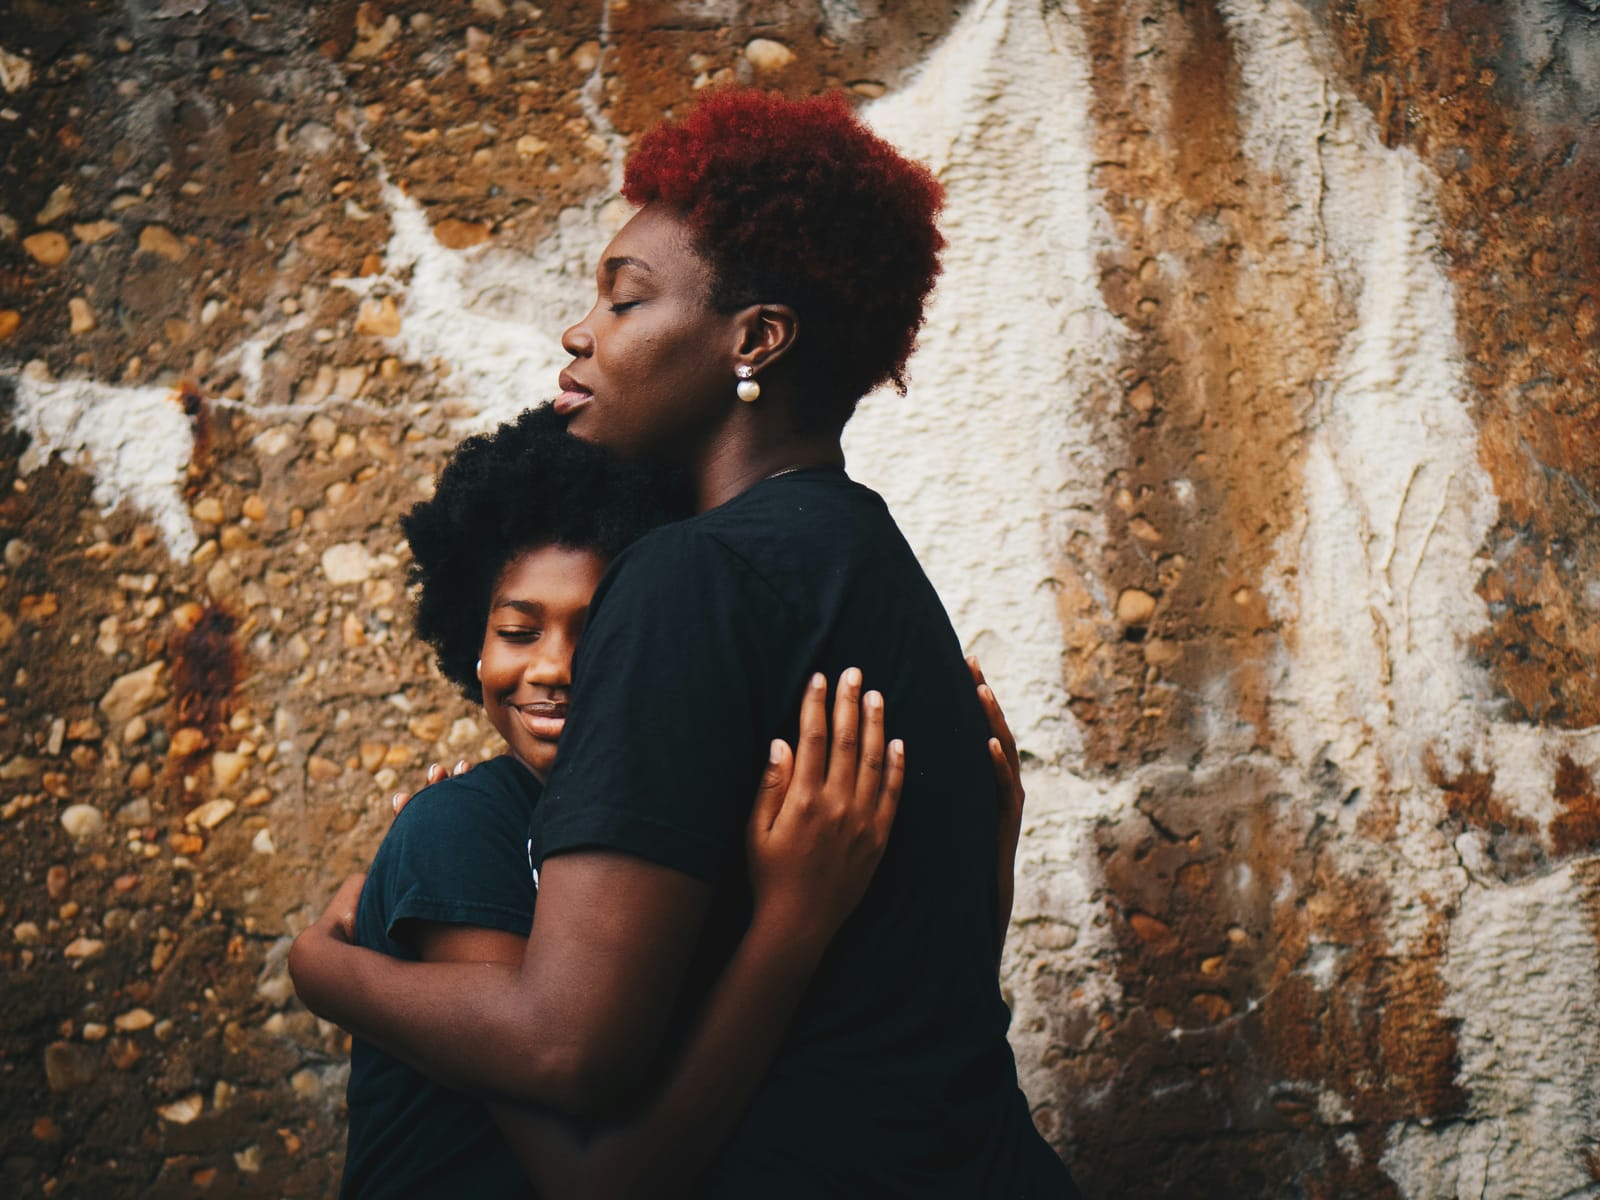 Mother and daughter embracing in front of a patchy concrete wall